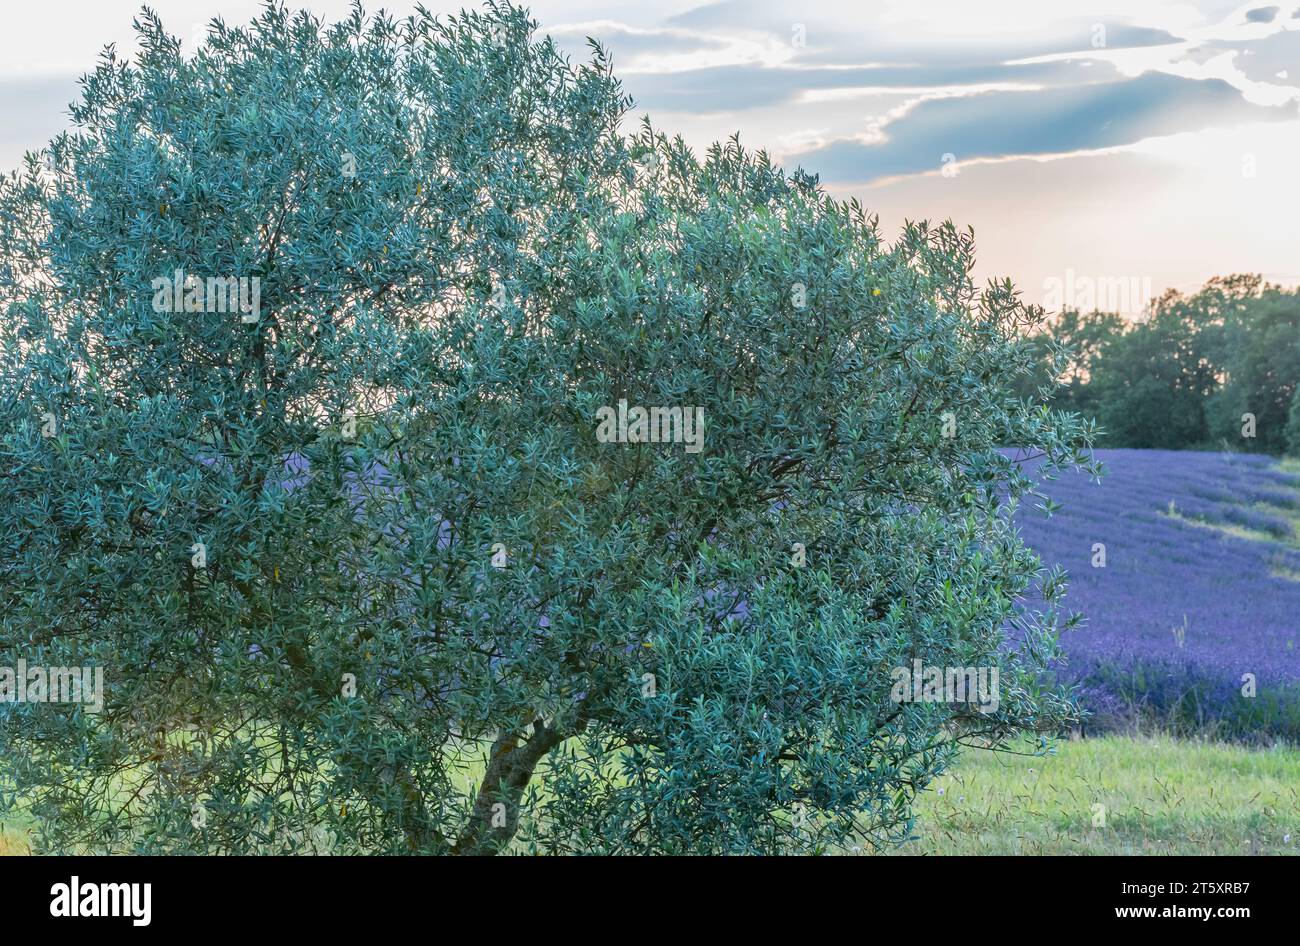 Fields of lavender in bloom on the Valensole plateau, Provence, South of France. Stock Photo